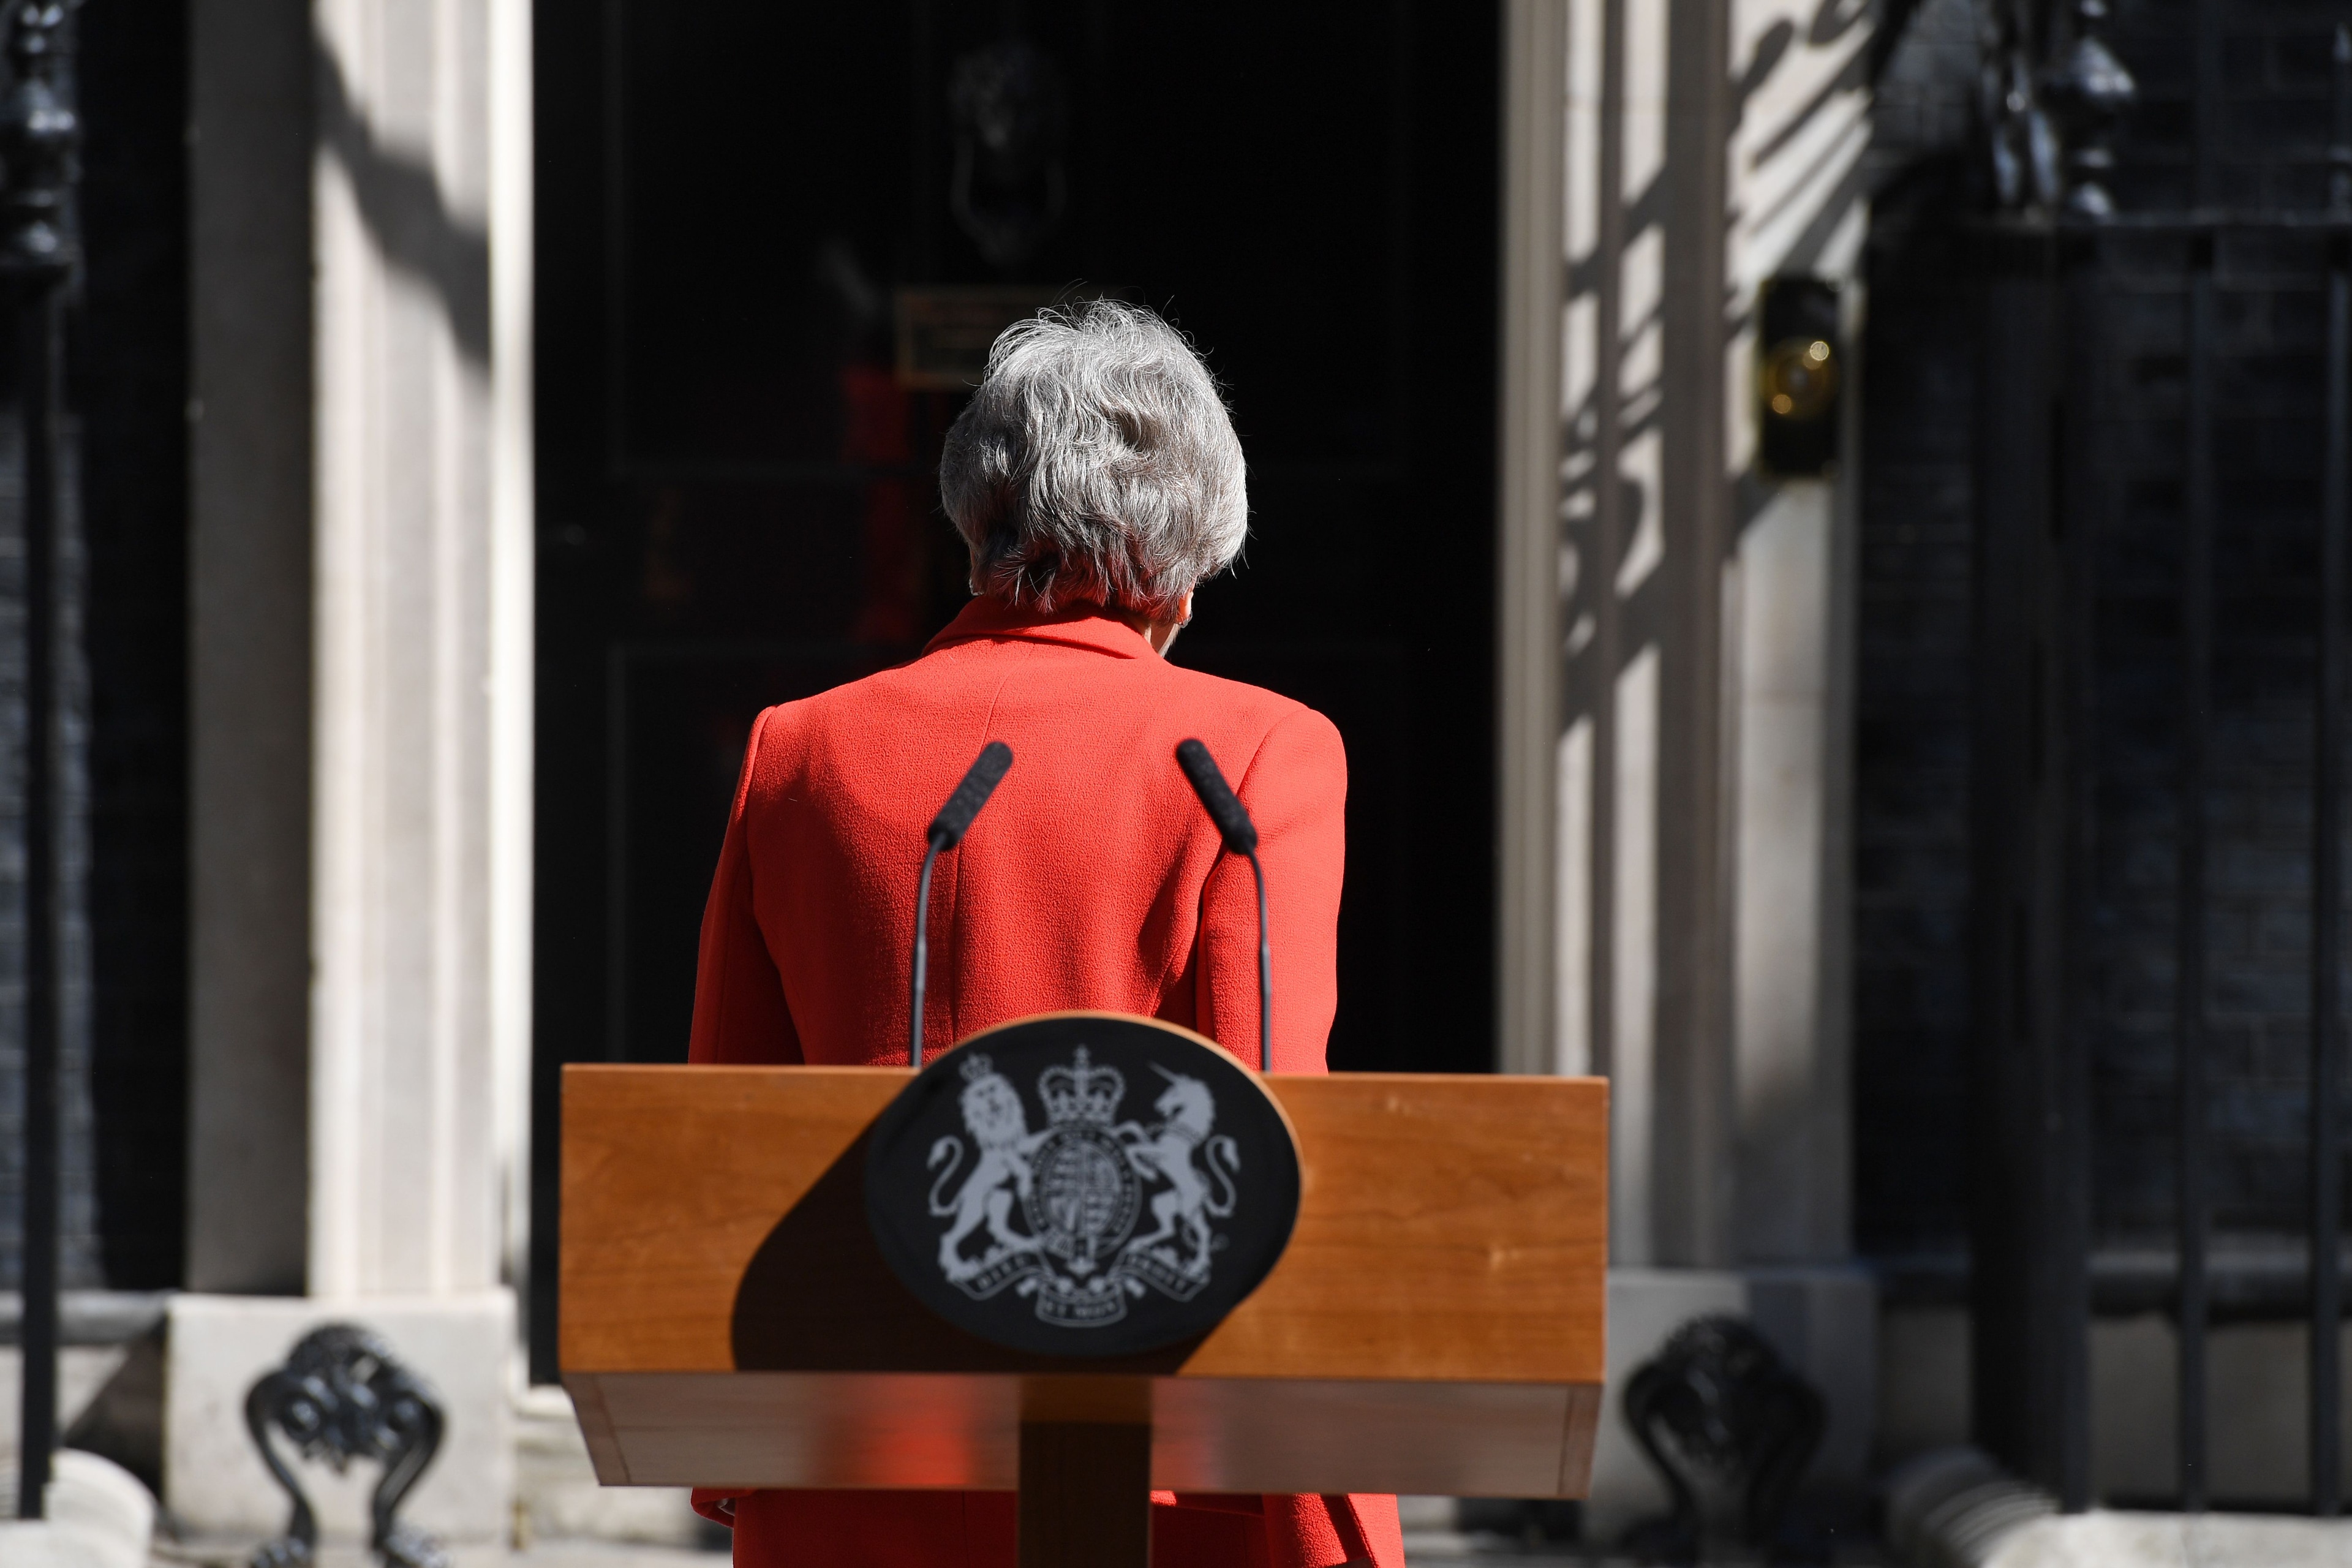 Time’s up for Theresa, but not much else has changed